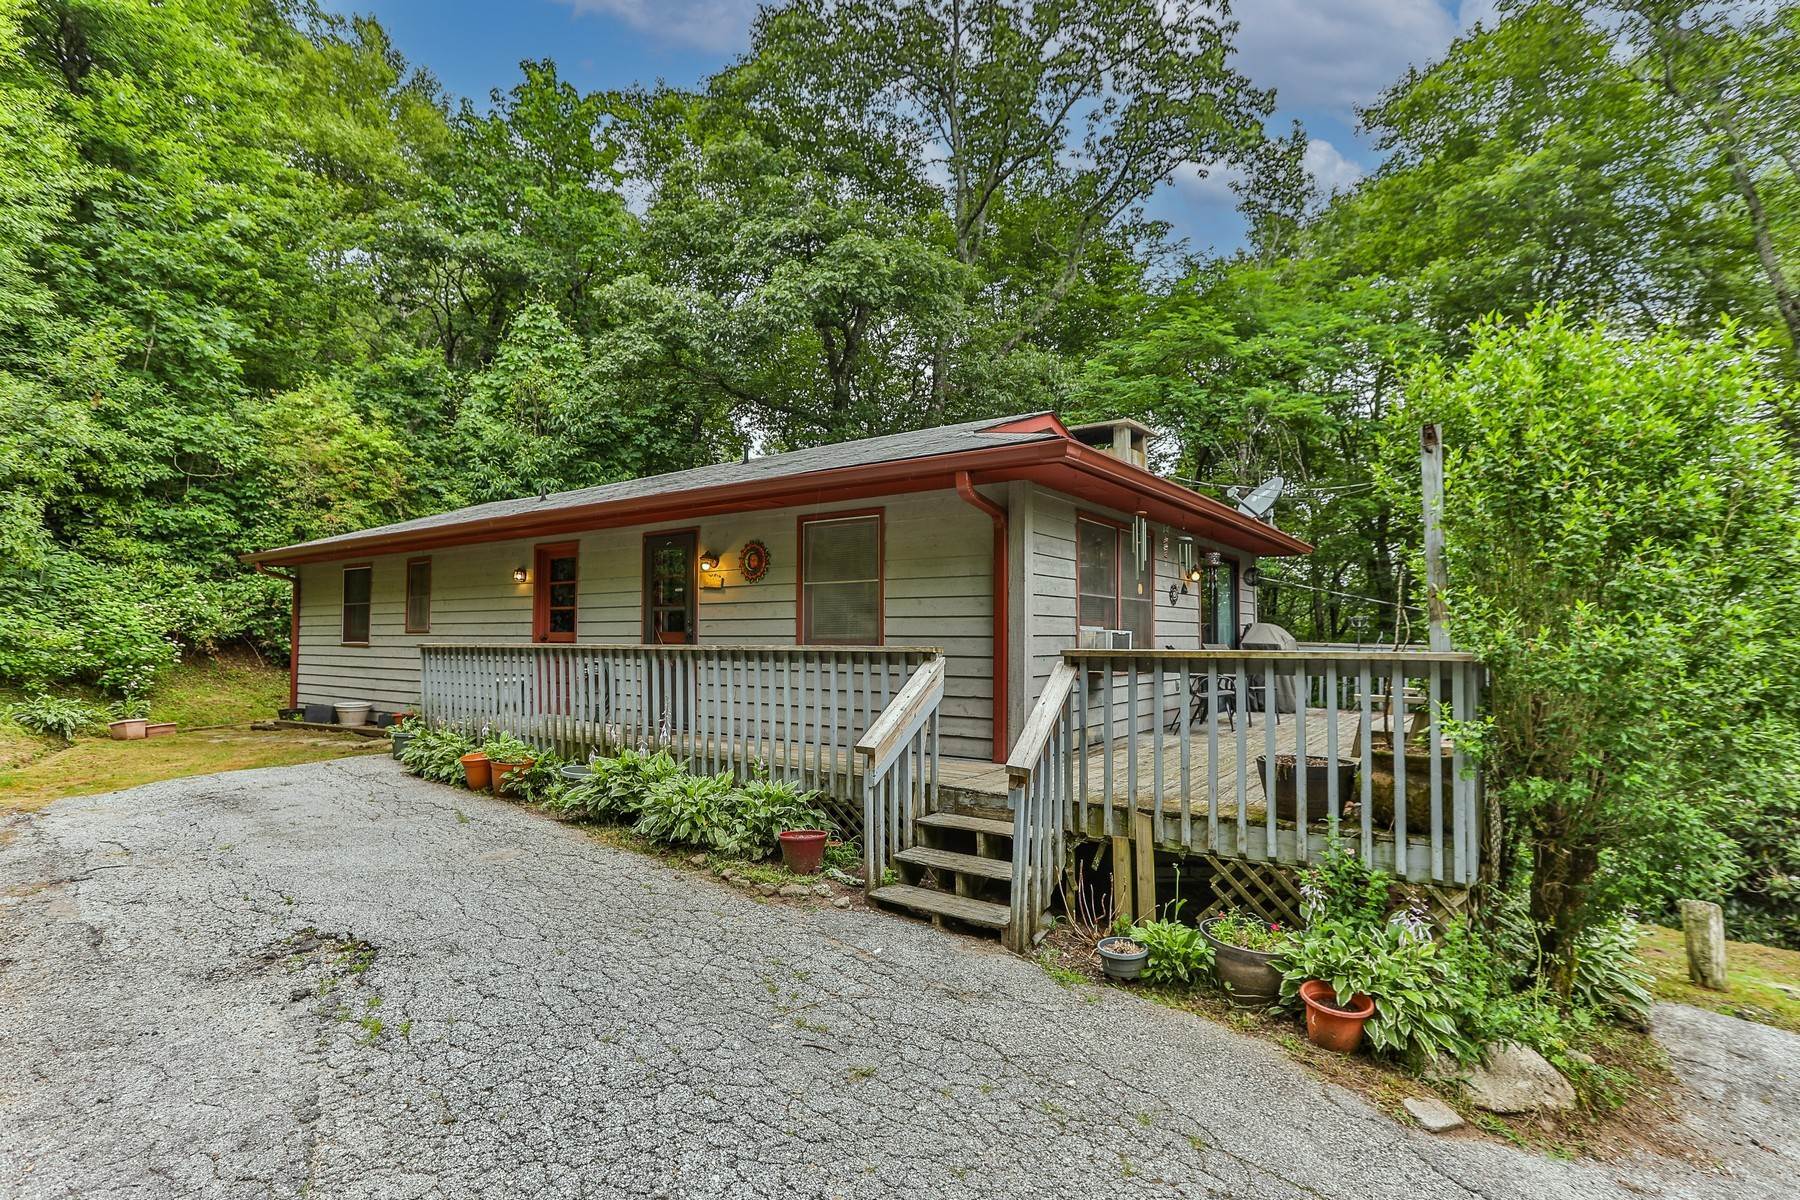 Single Family Homes for Sale at 865 Wilson Road Highlands, NC 28741 865 Wilson Road Highlands, North Carolina 28741 United States